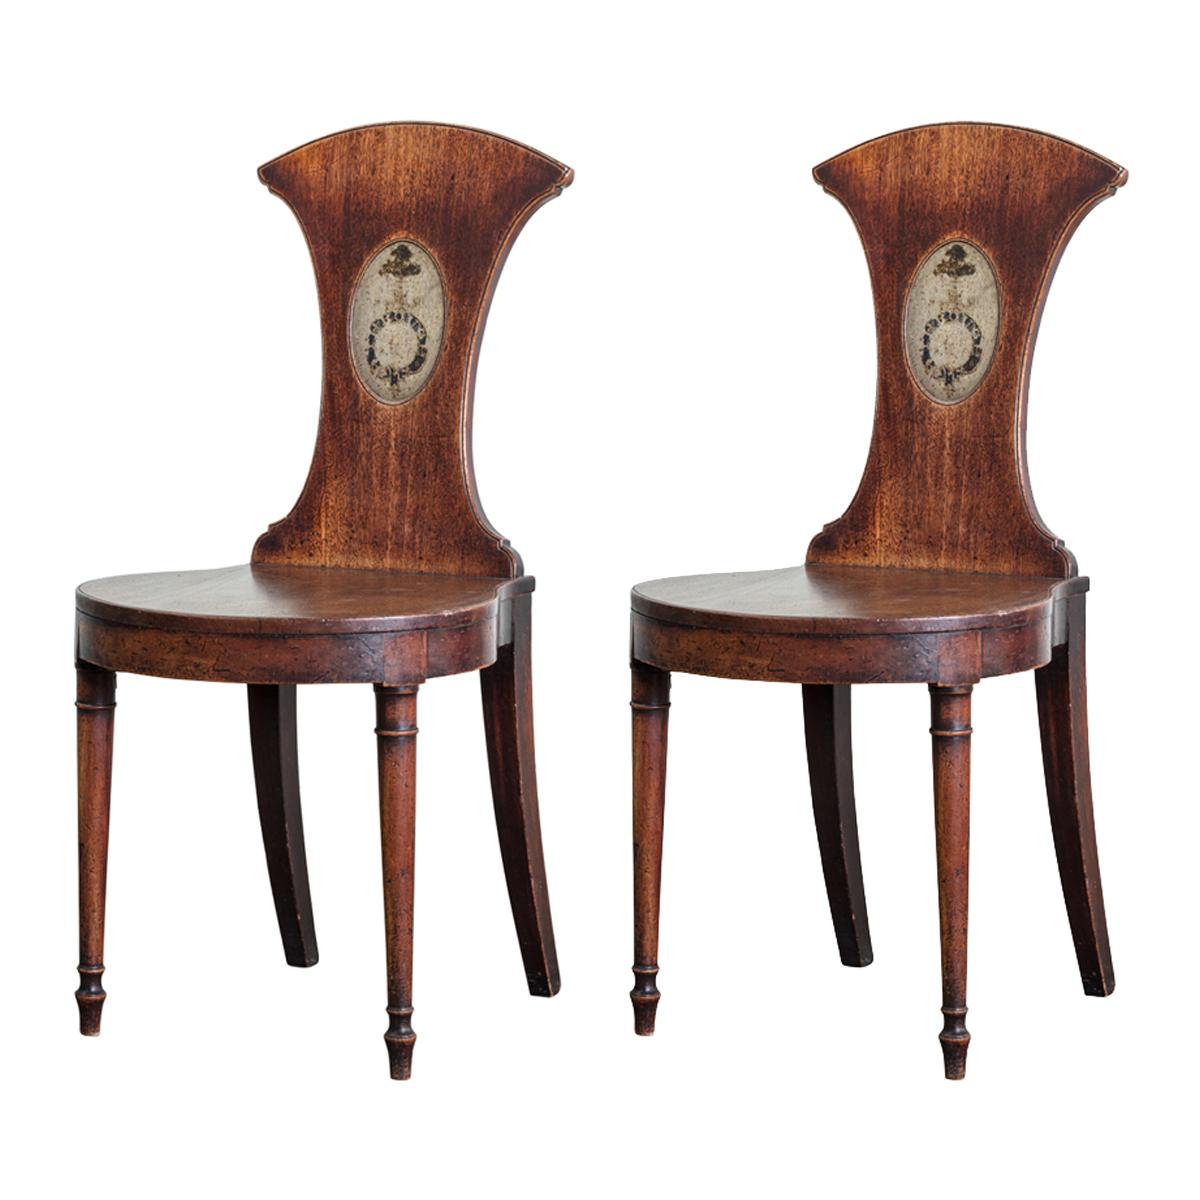 Pair of Early 19th Century Hall Chairs